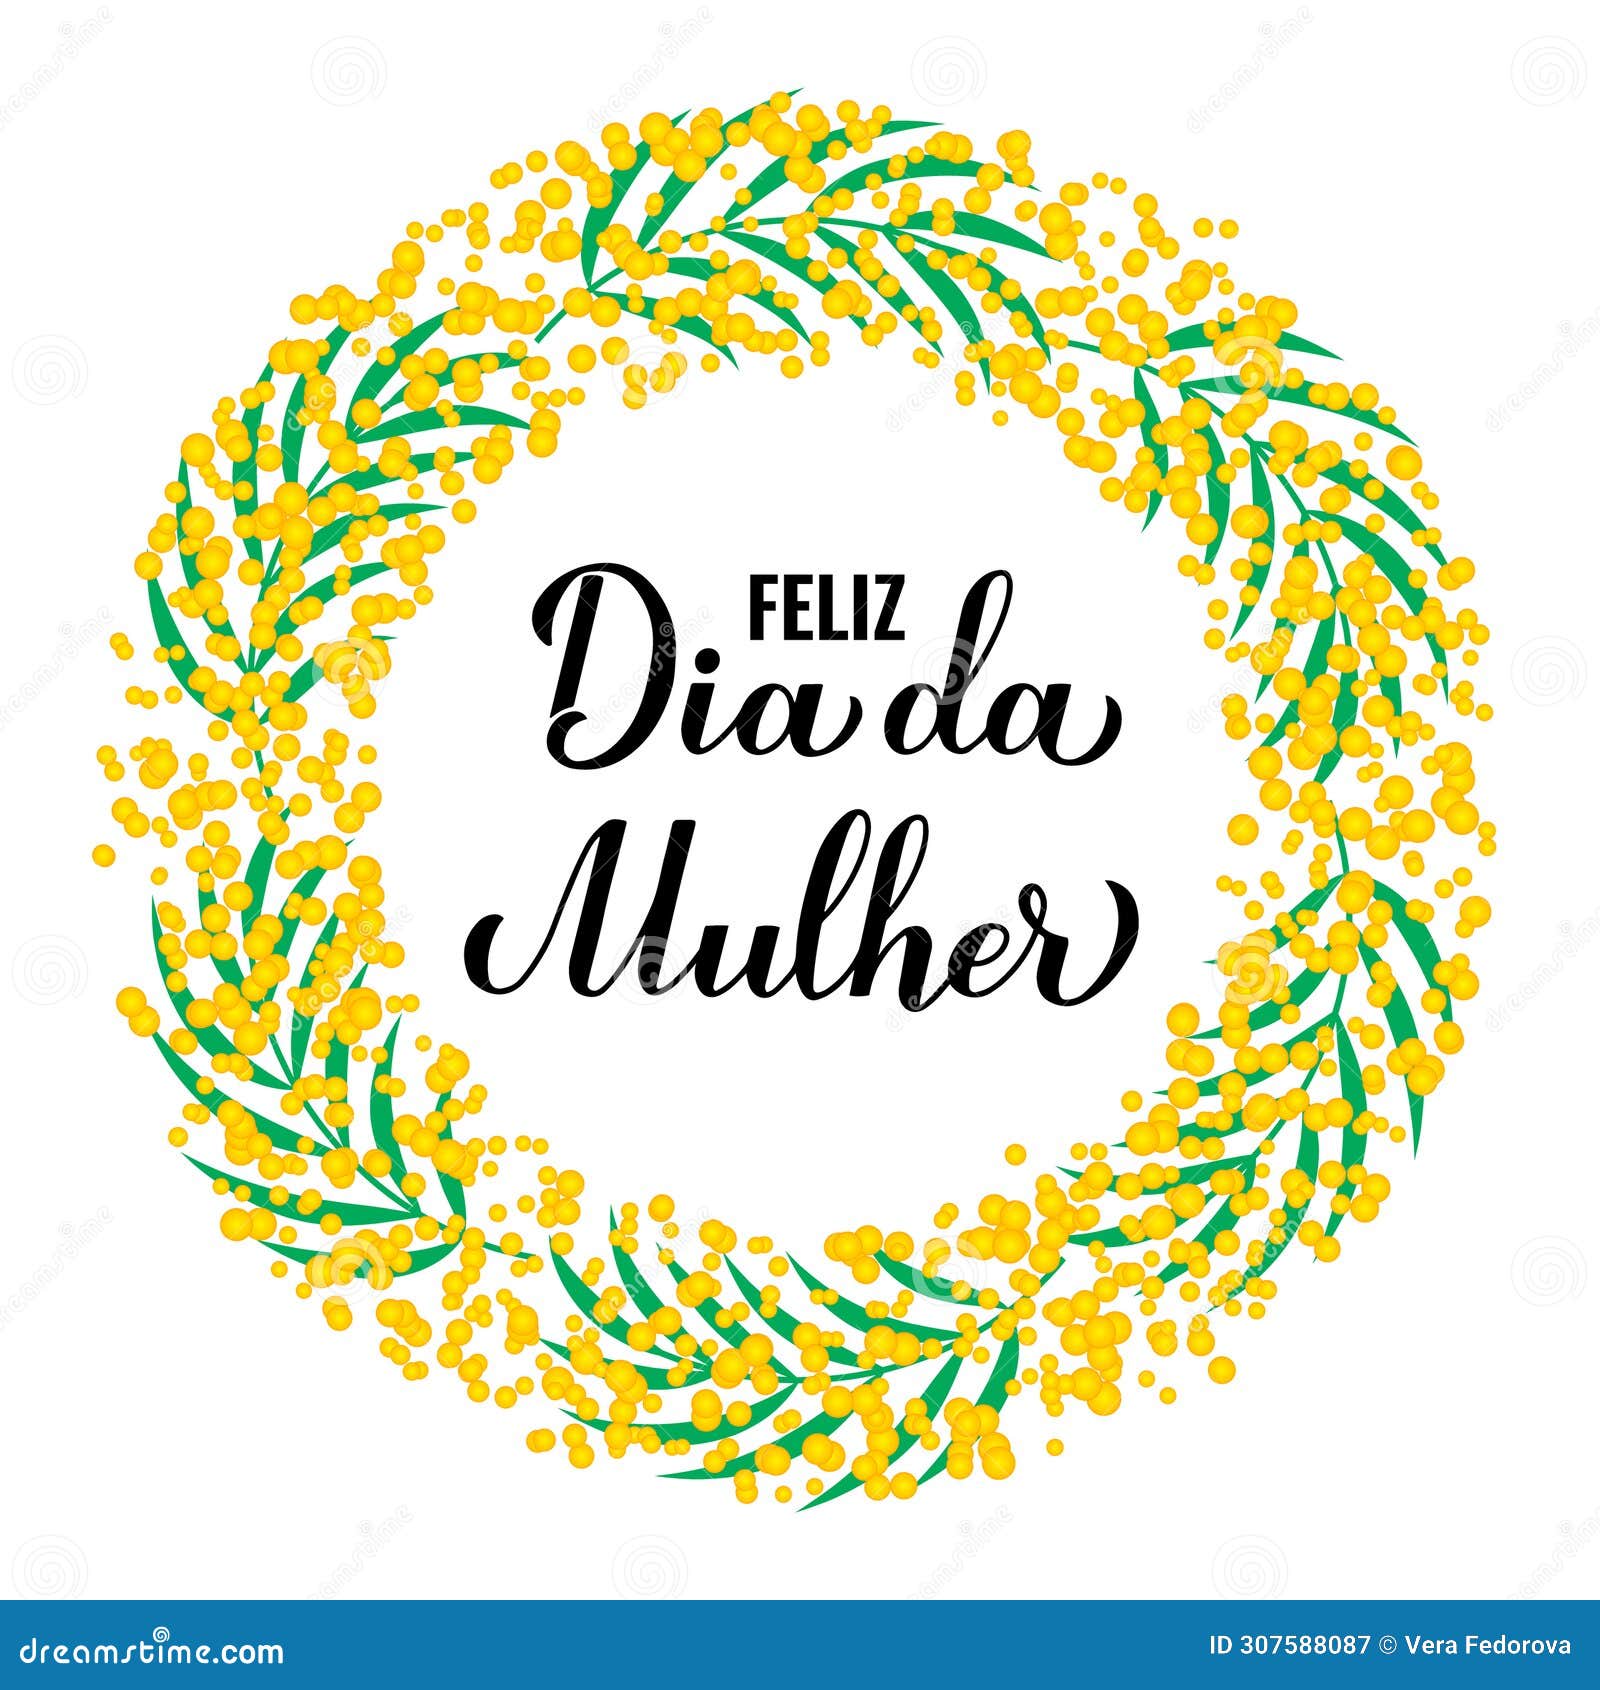 feliz dia da mulher - happy womens day in portuguese. calligraphy hand lettering with floral mimosa wreath